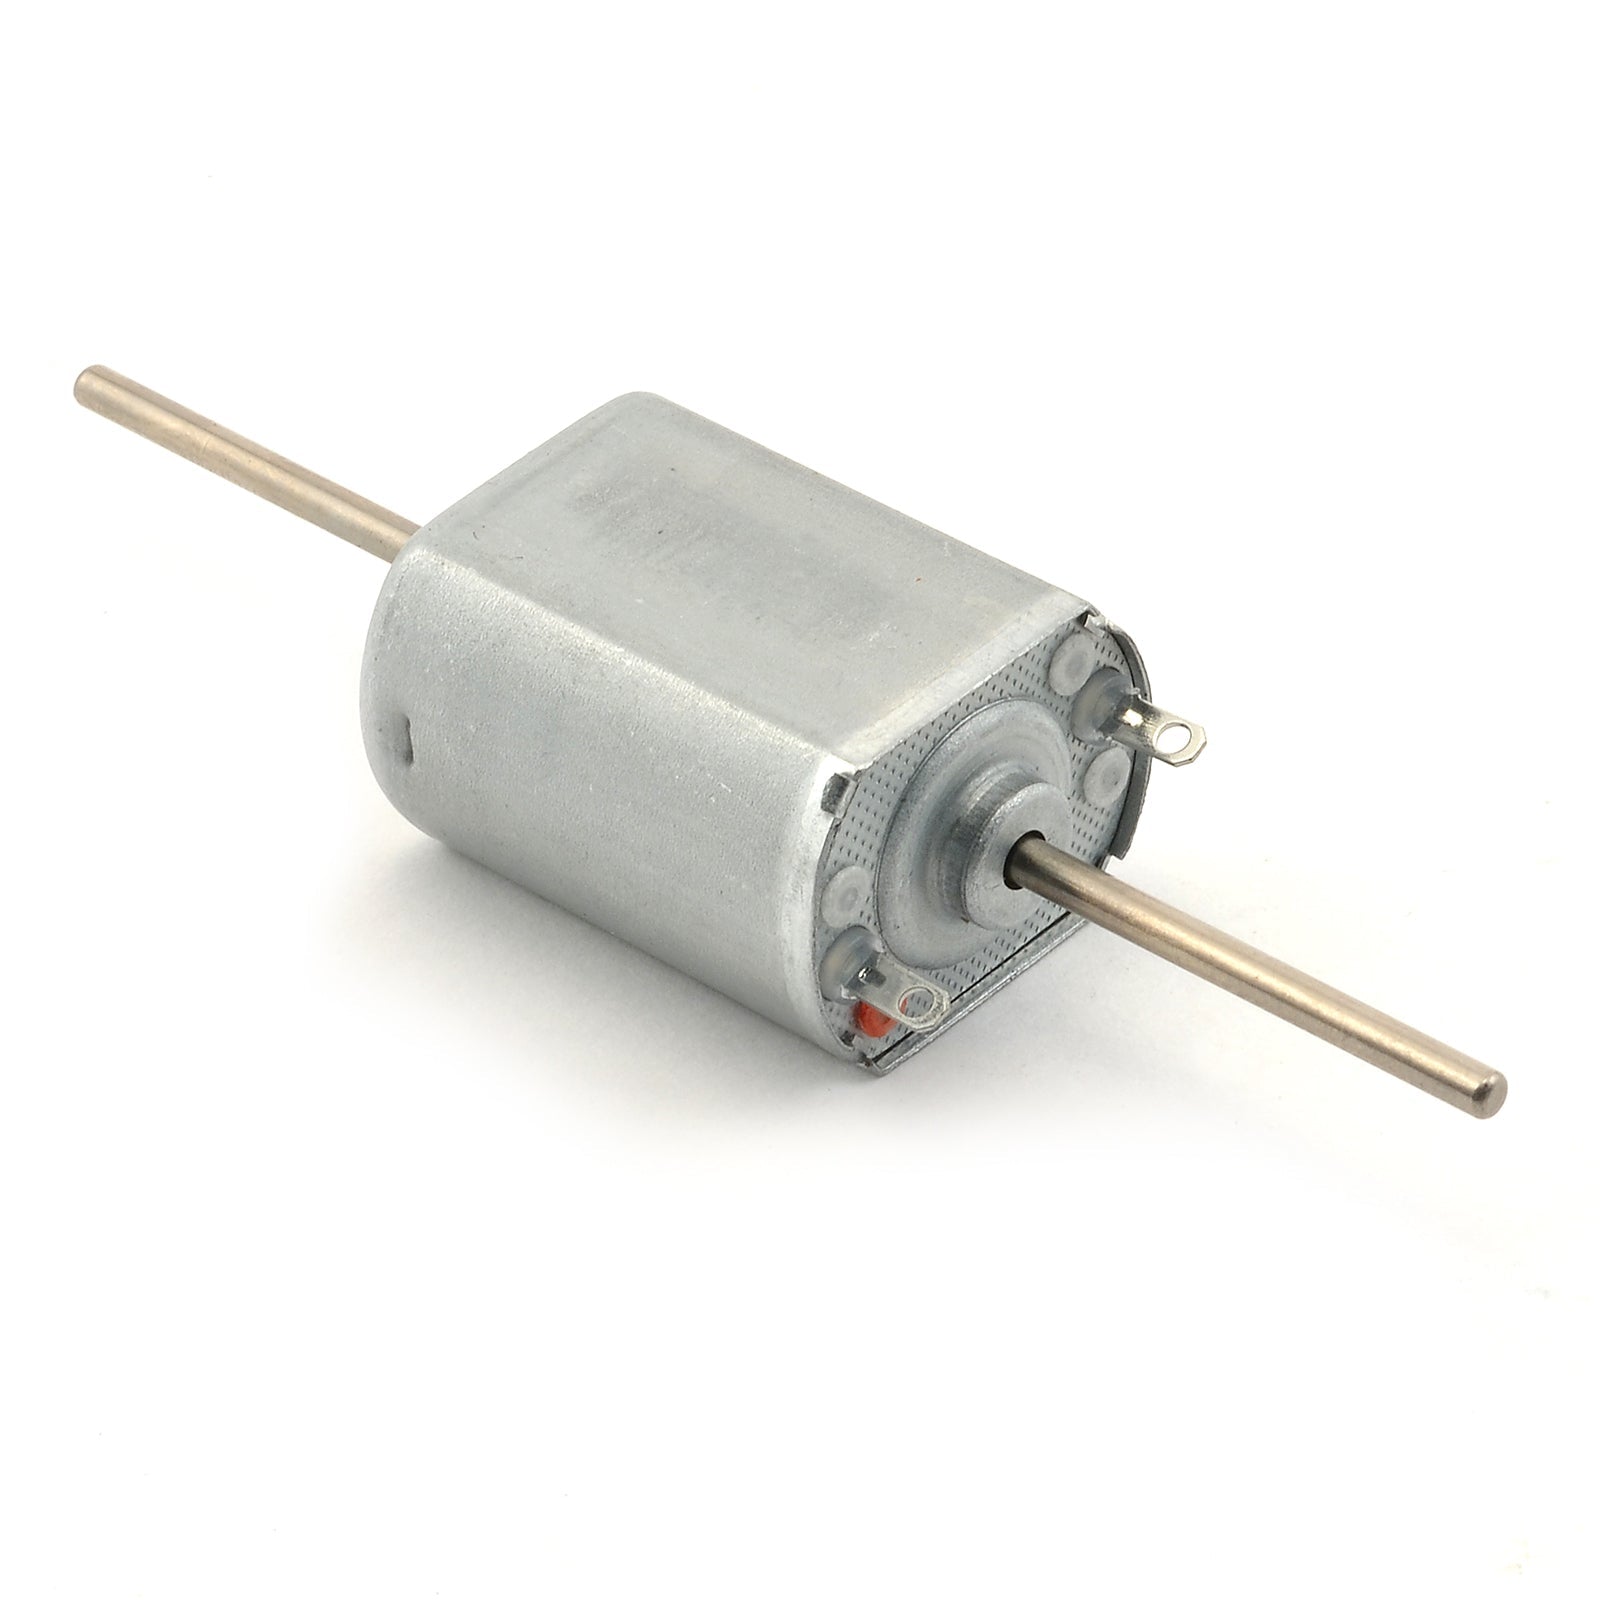 Flat Can Motor, Style 2025, 12v